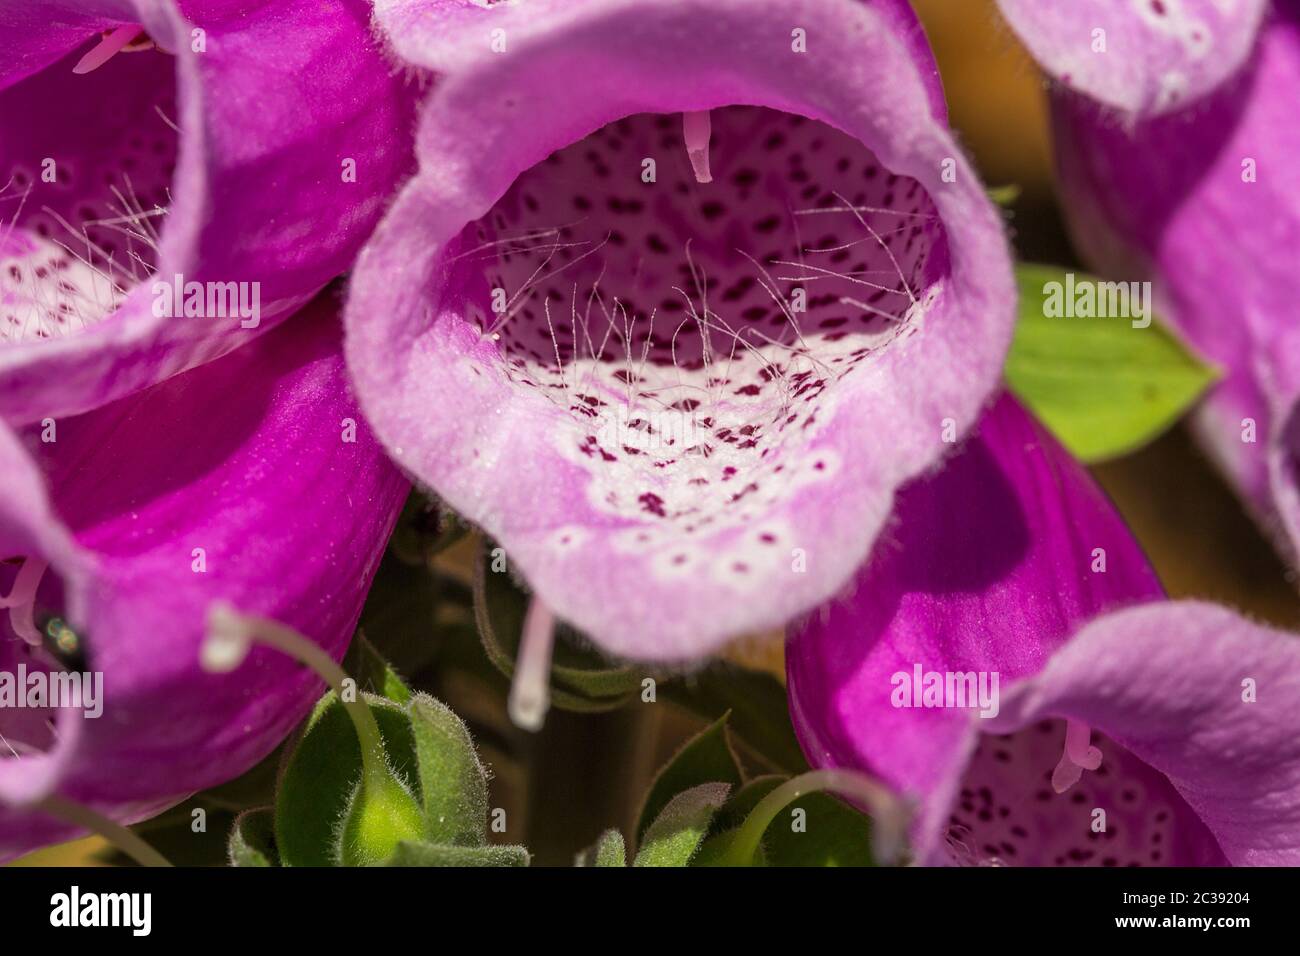 Foxglove closeup Digitalis purpurea purple petal tube made of five lobes with large lobe at the bottom of the flower. Spotty pattern inside with hairs Stock Photo